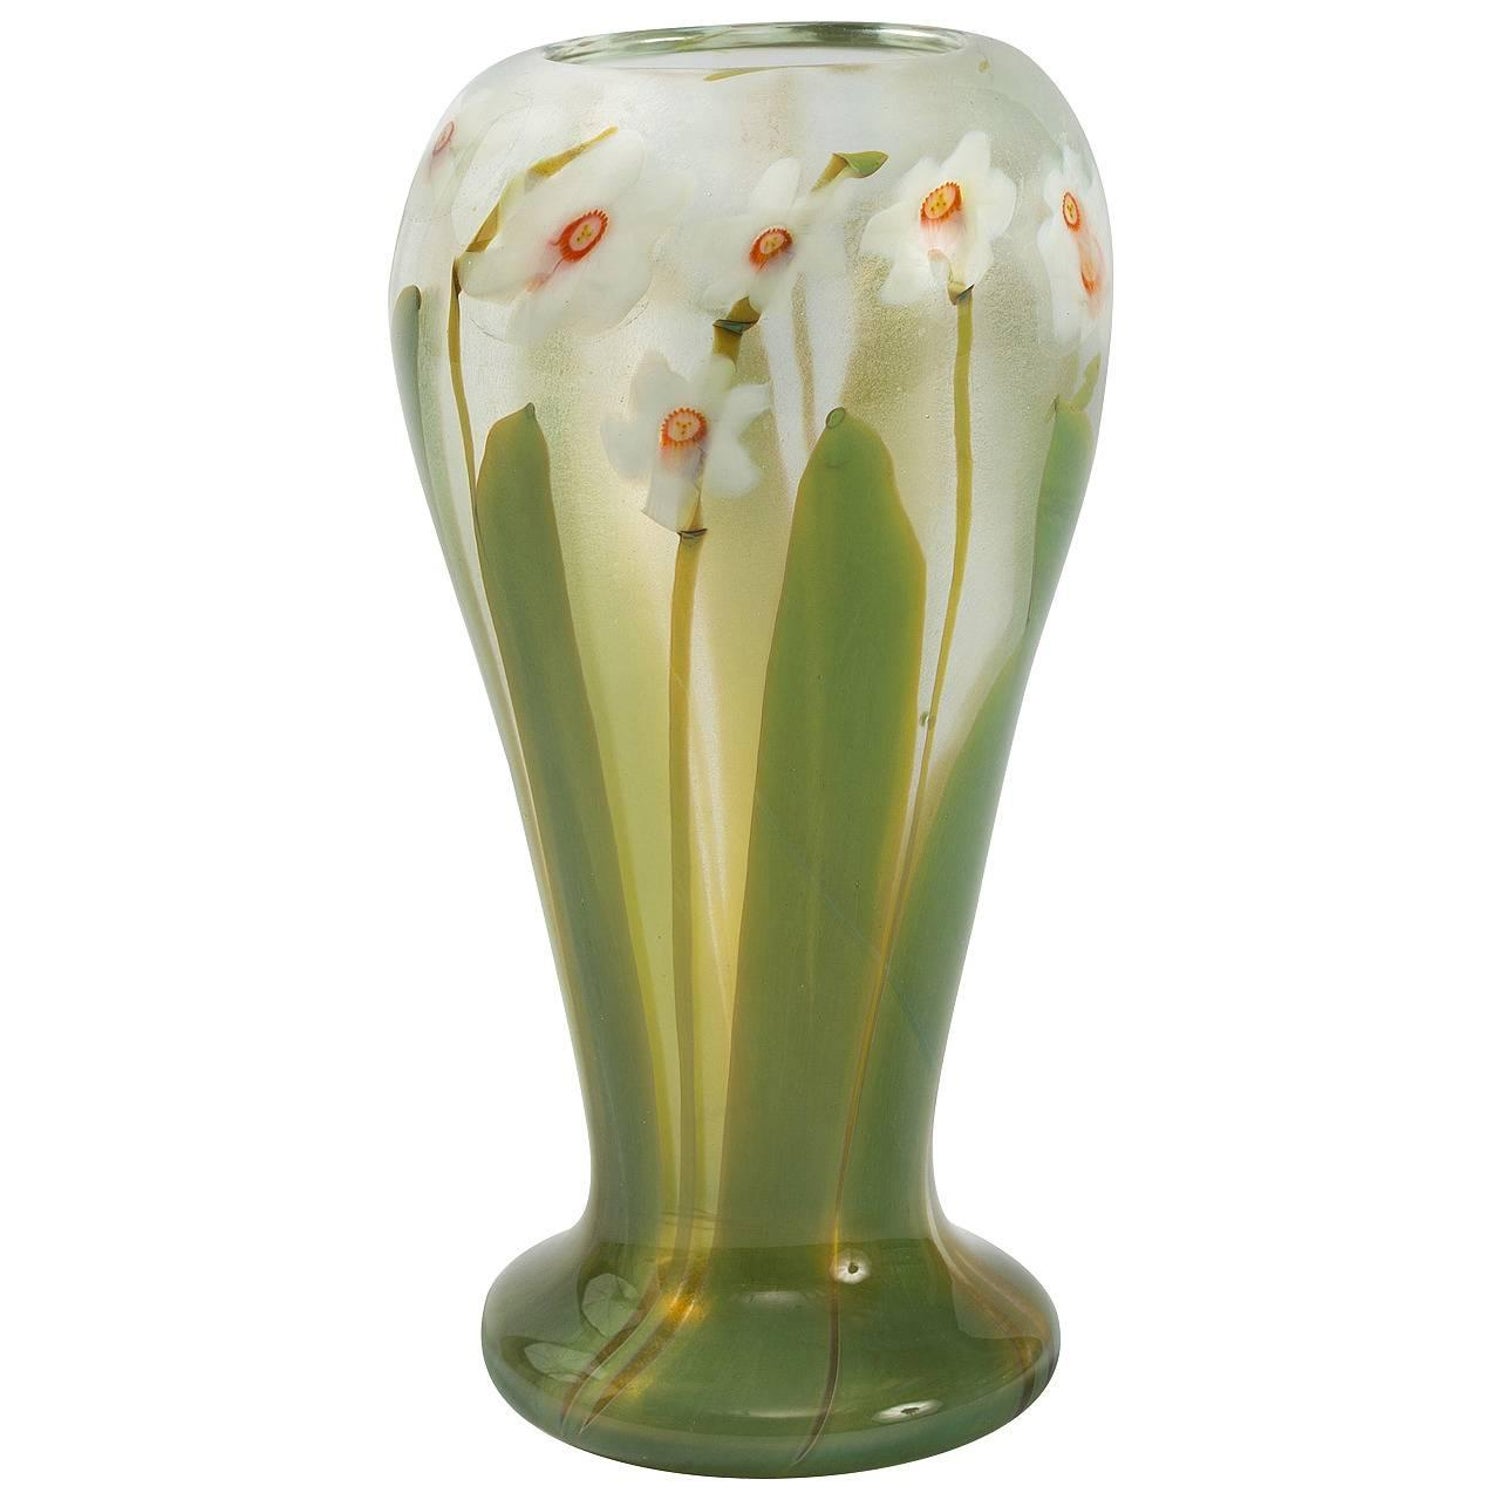 Tiffany Studios New York Glass "Paperweight" Vase For Sale at 1stDibs